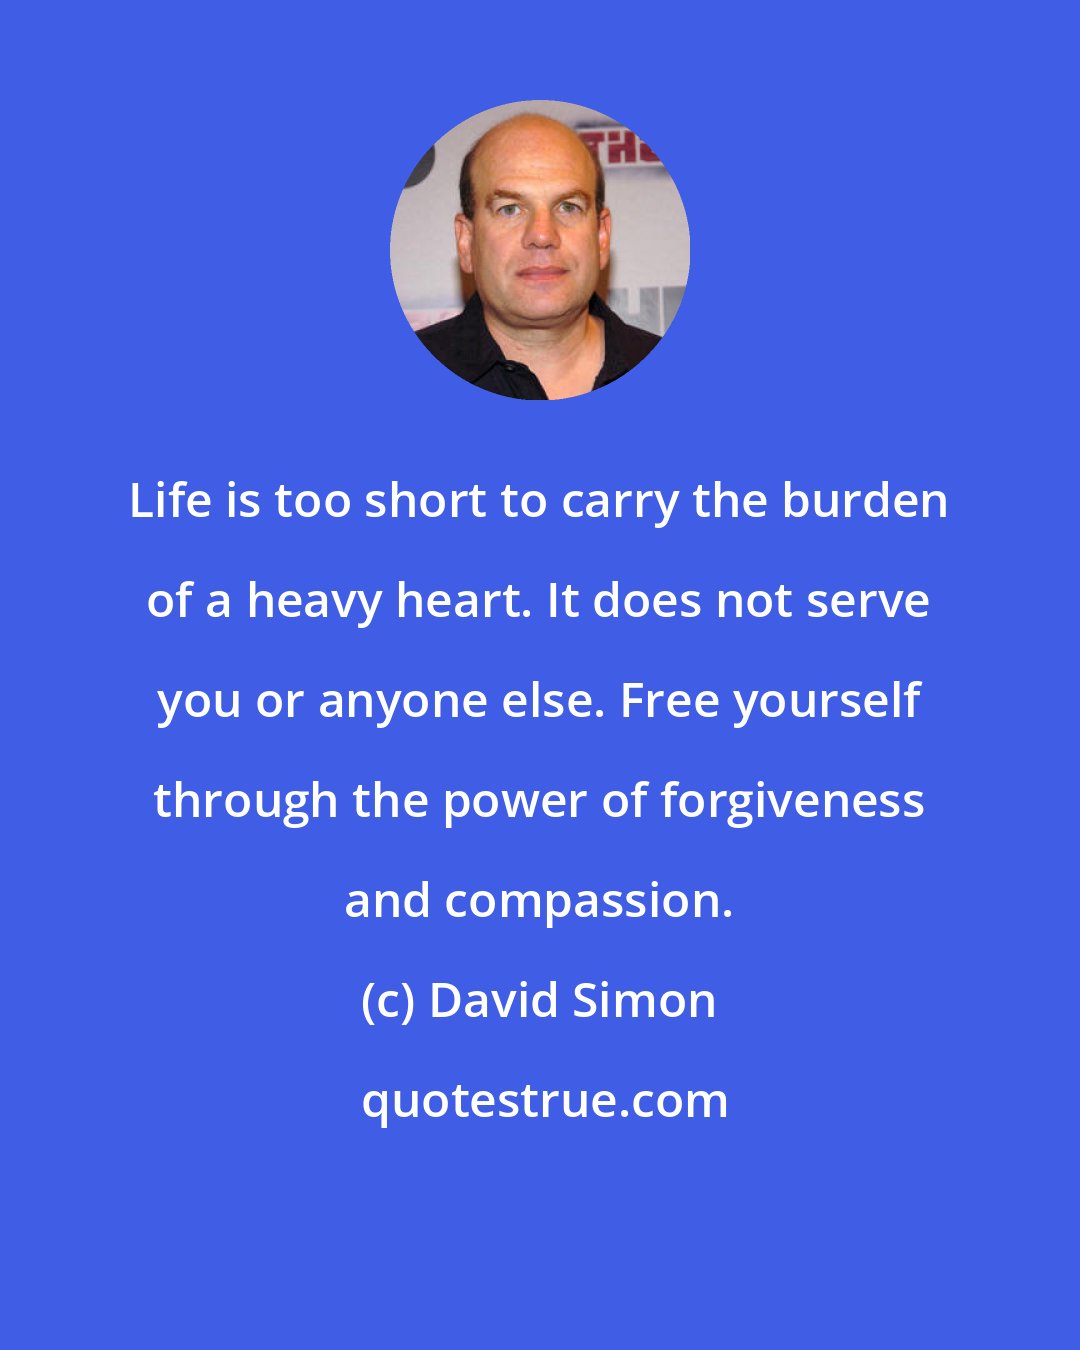 David Simon: Life is too short to carry the burden of a heavy heart. It does not serve you or anyone else. Free yourself through the power of forgiveness and compassion.